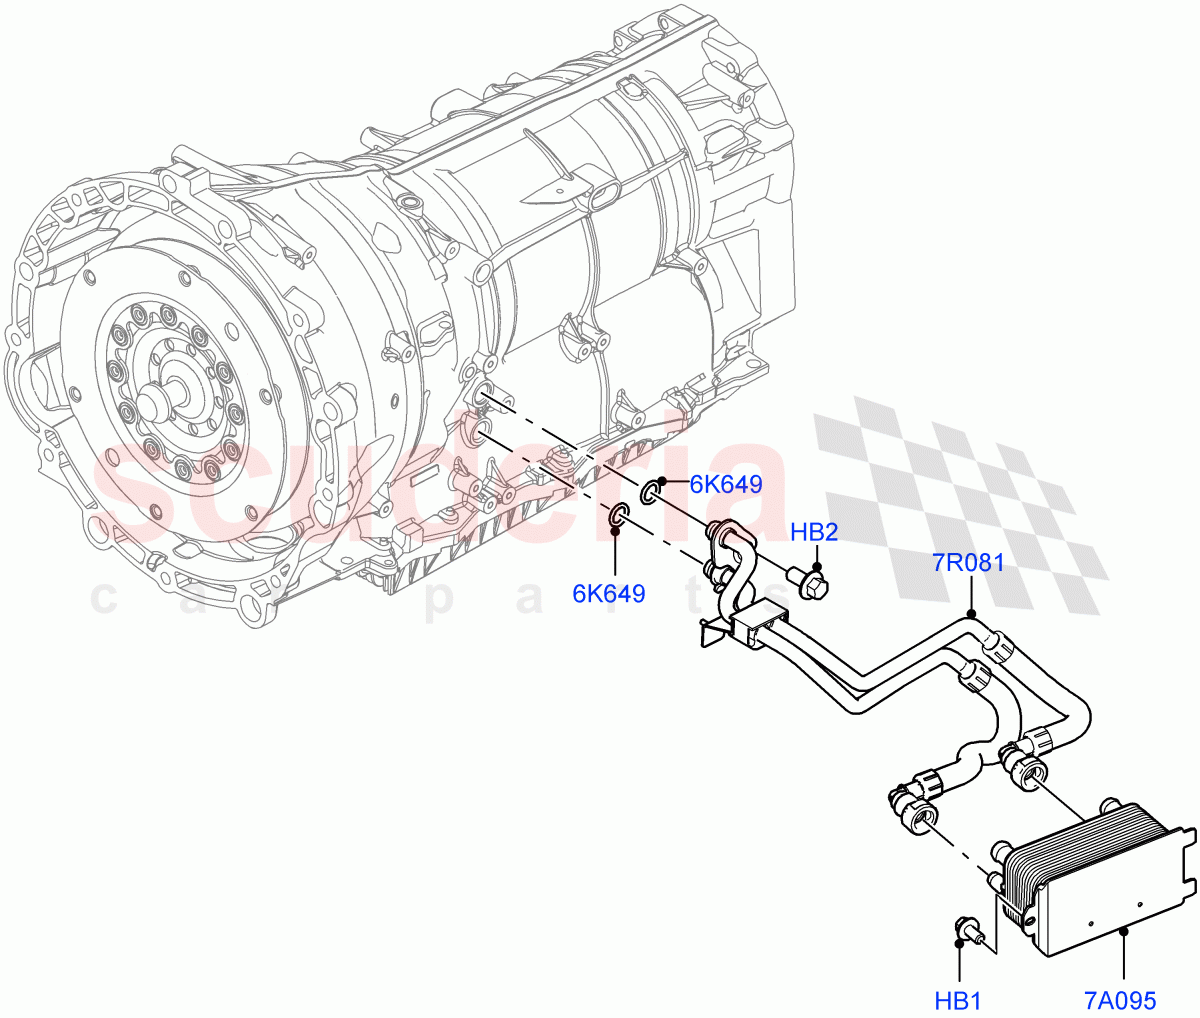 Transmission Cooling Systems(3.0L AJ20P6 Petrol High,8 Speed Auto Trans ZF 8HP76,3.0L AJ20D6 Diesel High)((V)FROMKA000001) of Land Rover Land Rover Range Rover Sport (2014+) [3.0 DOHC GDI SC V6 Petrol]